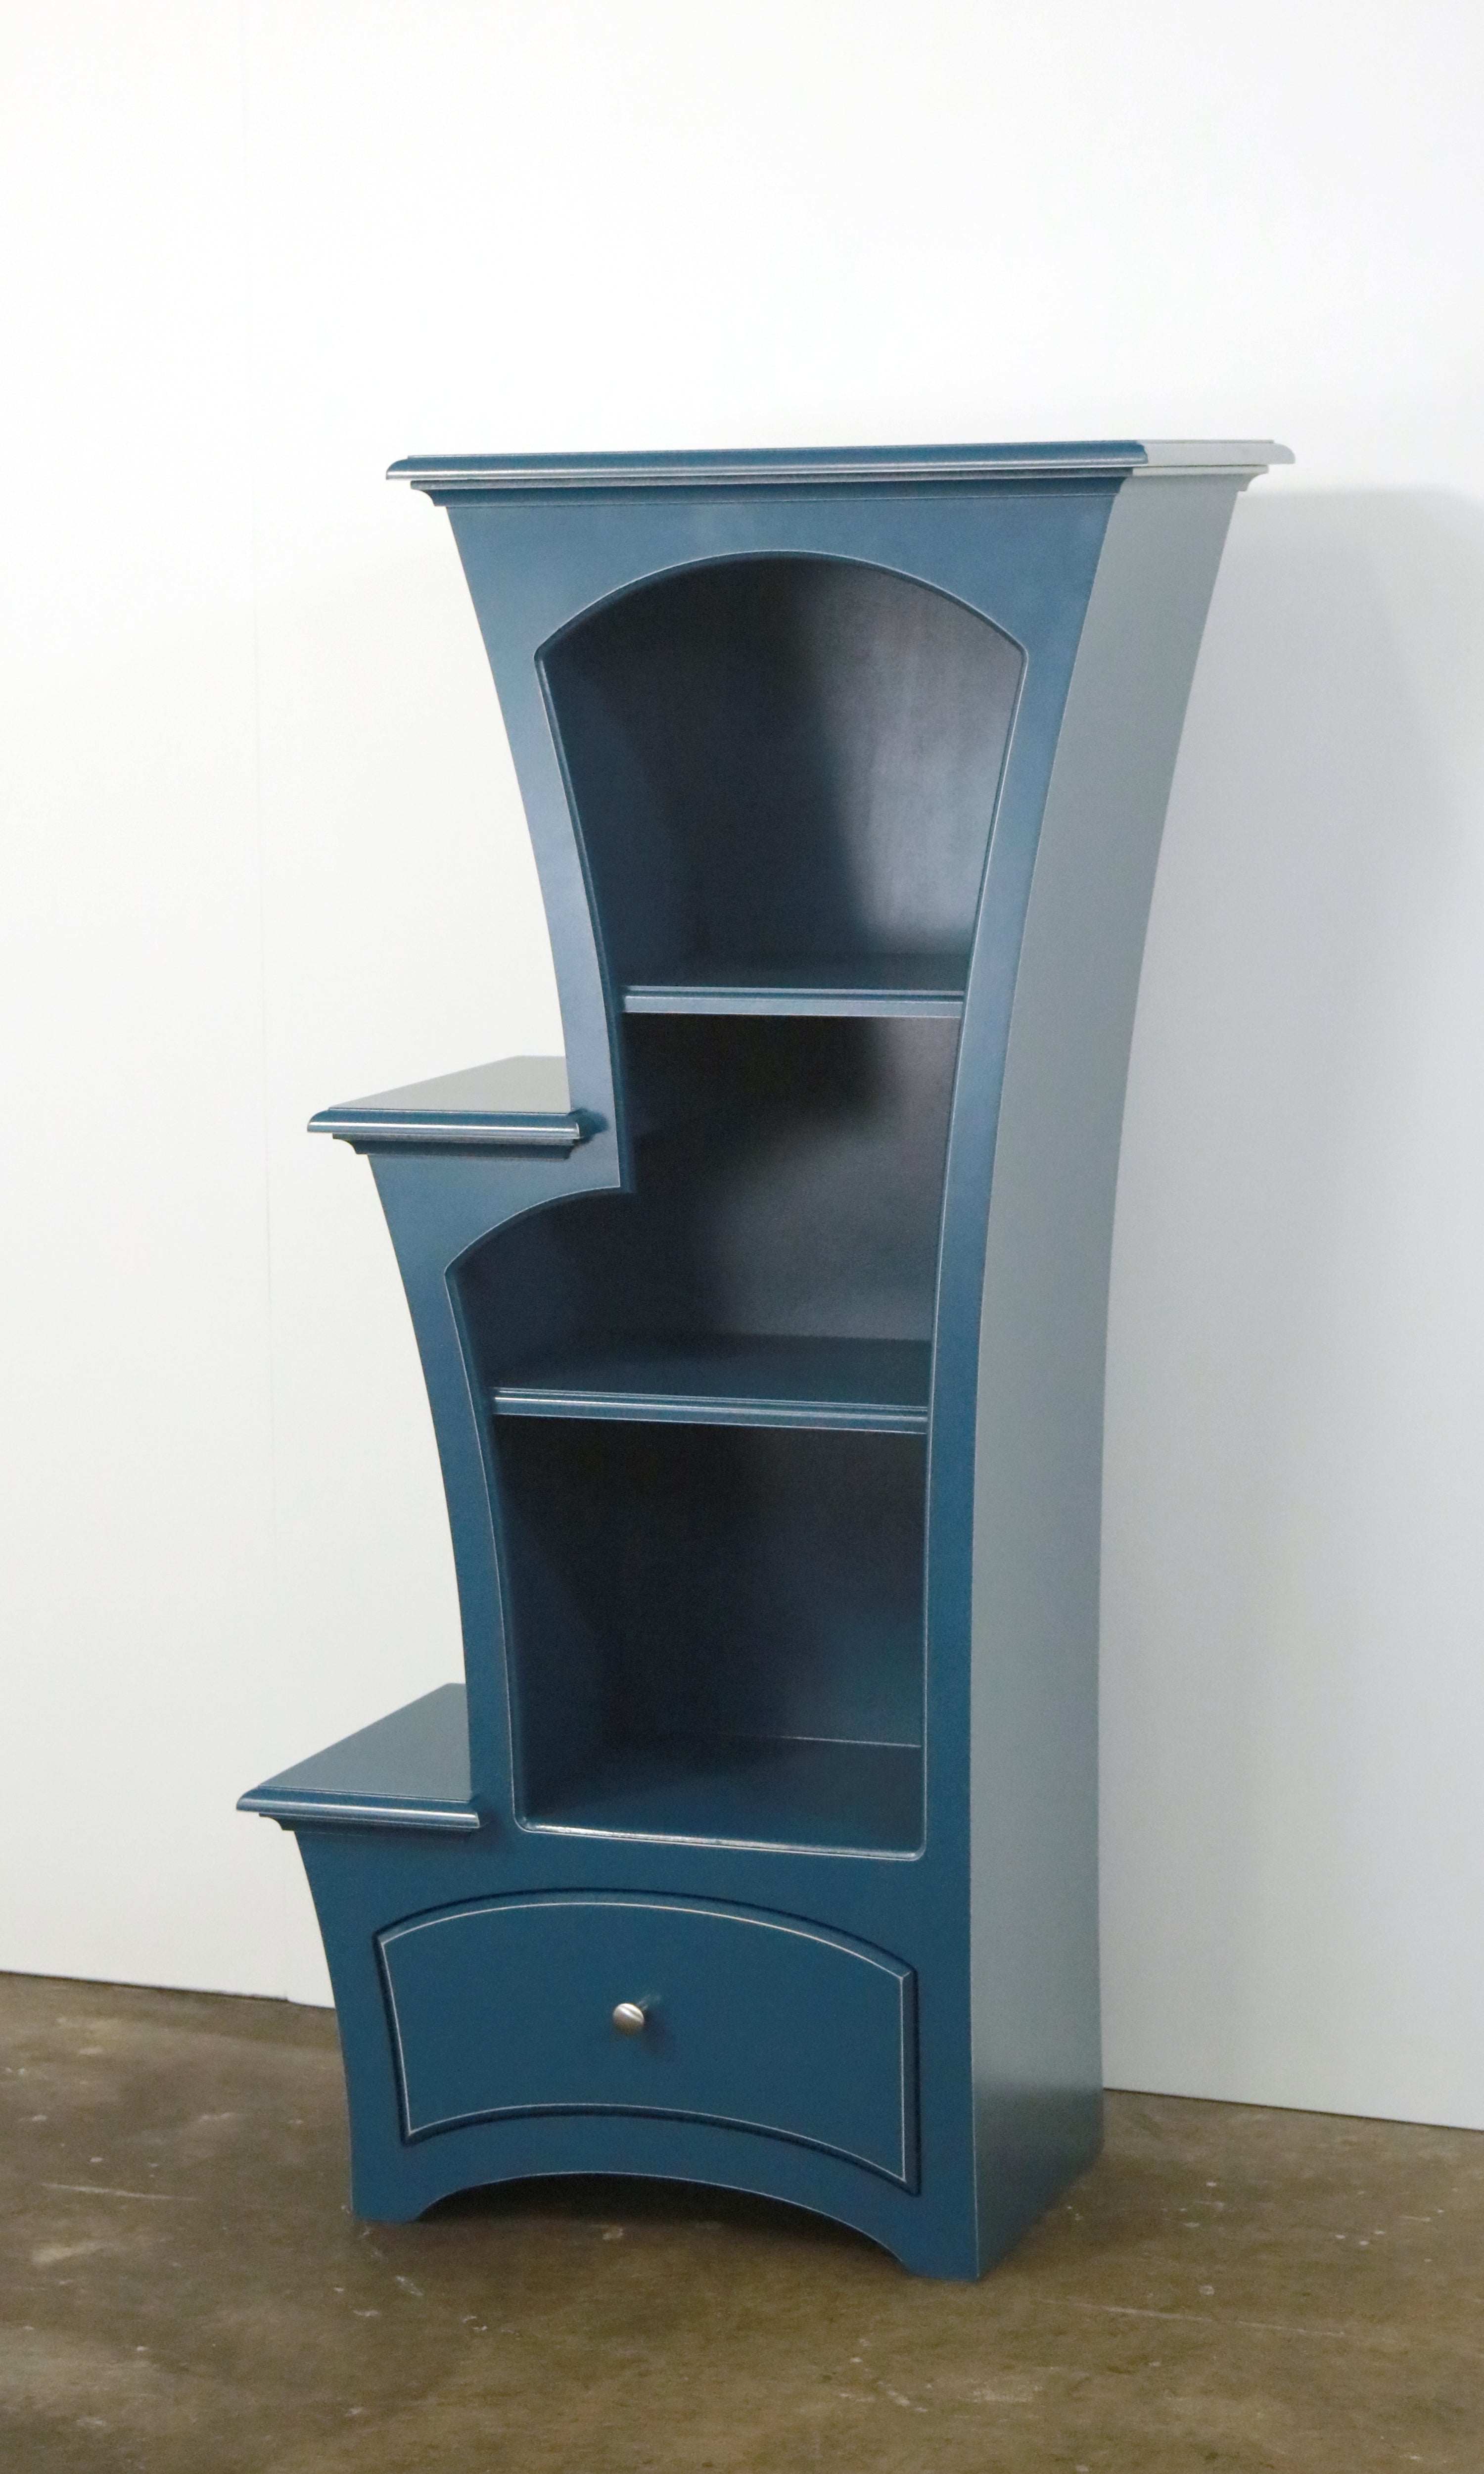 Bookcase No. 7 -  Stepped Display Bookcase